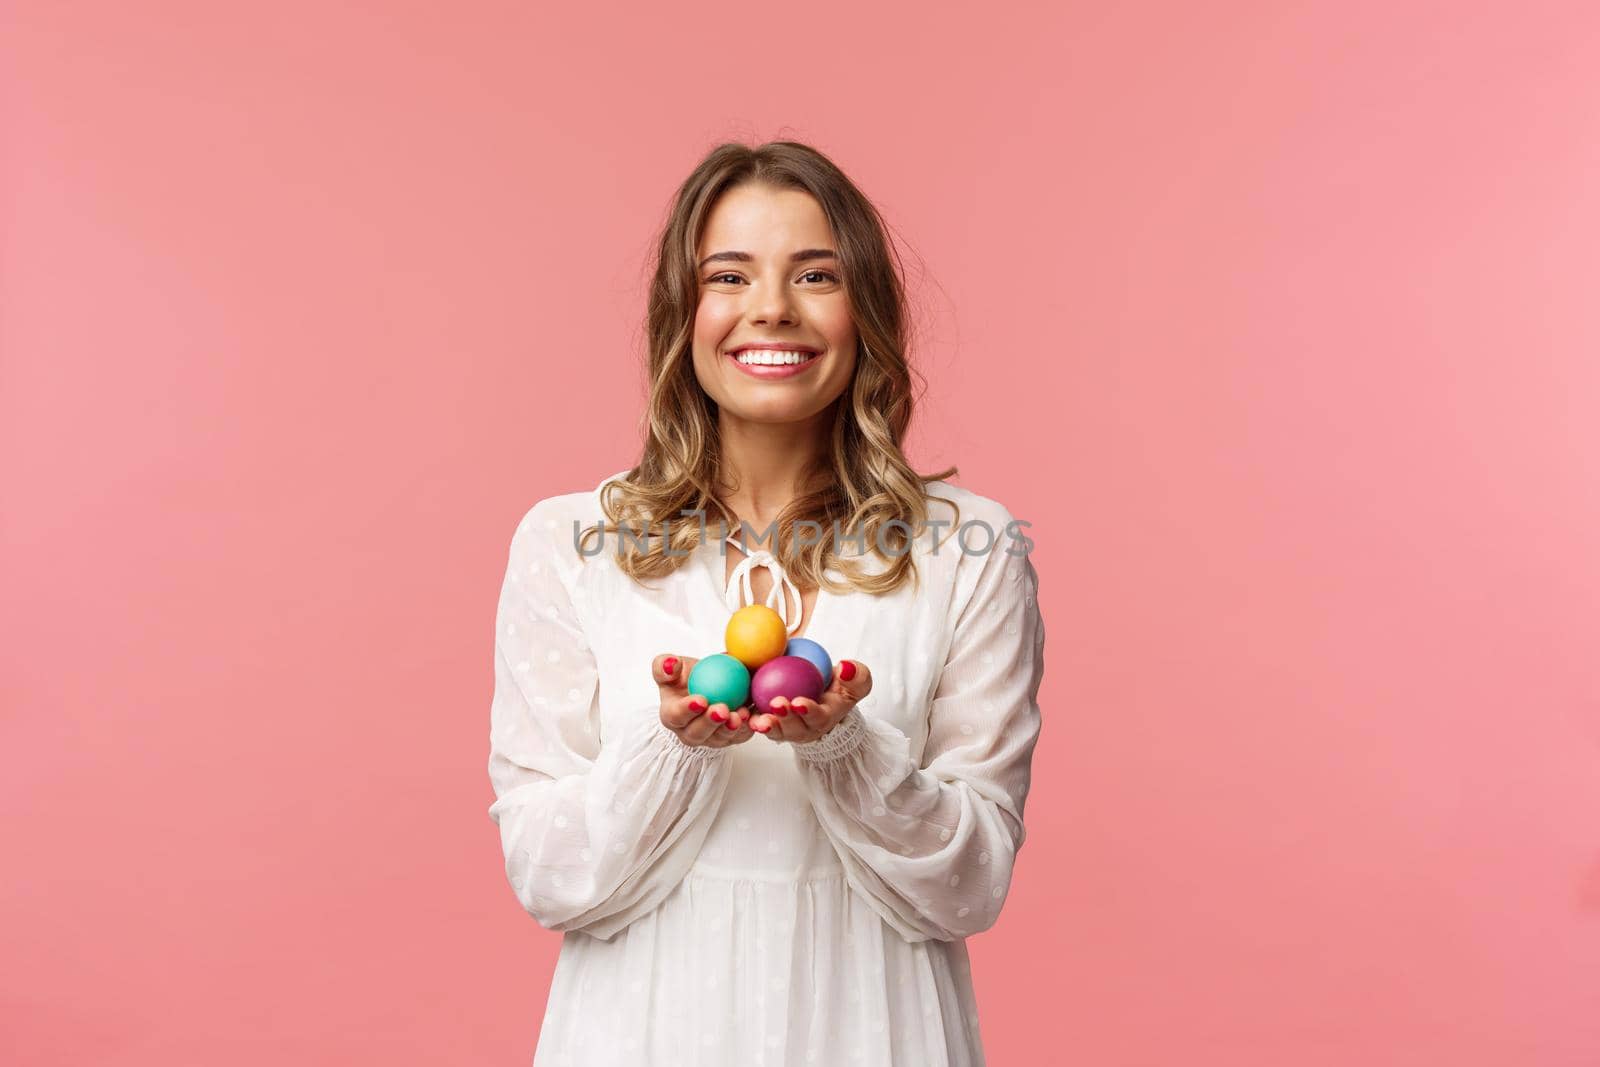 Holidays, spring and party concept. Portrait of tender, lovely blonde girl in white dress, holding Easter painted eggs, celebrating orthodox day, smiling cheerful share positivity, pink background.